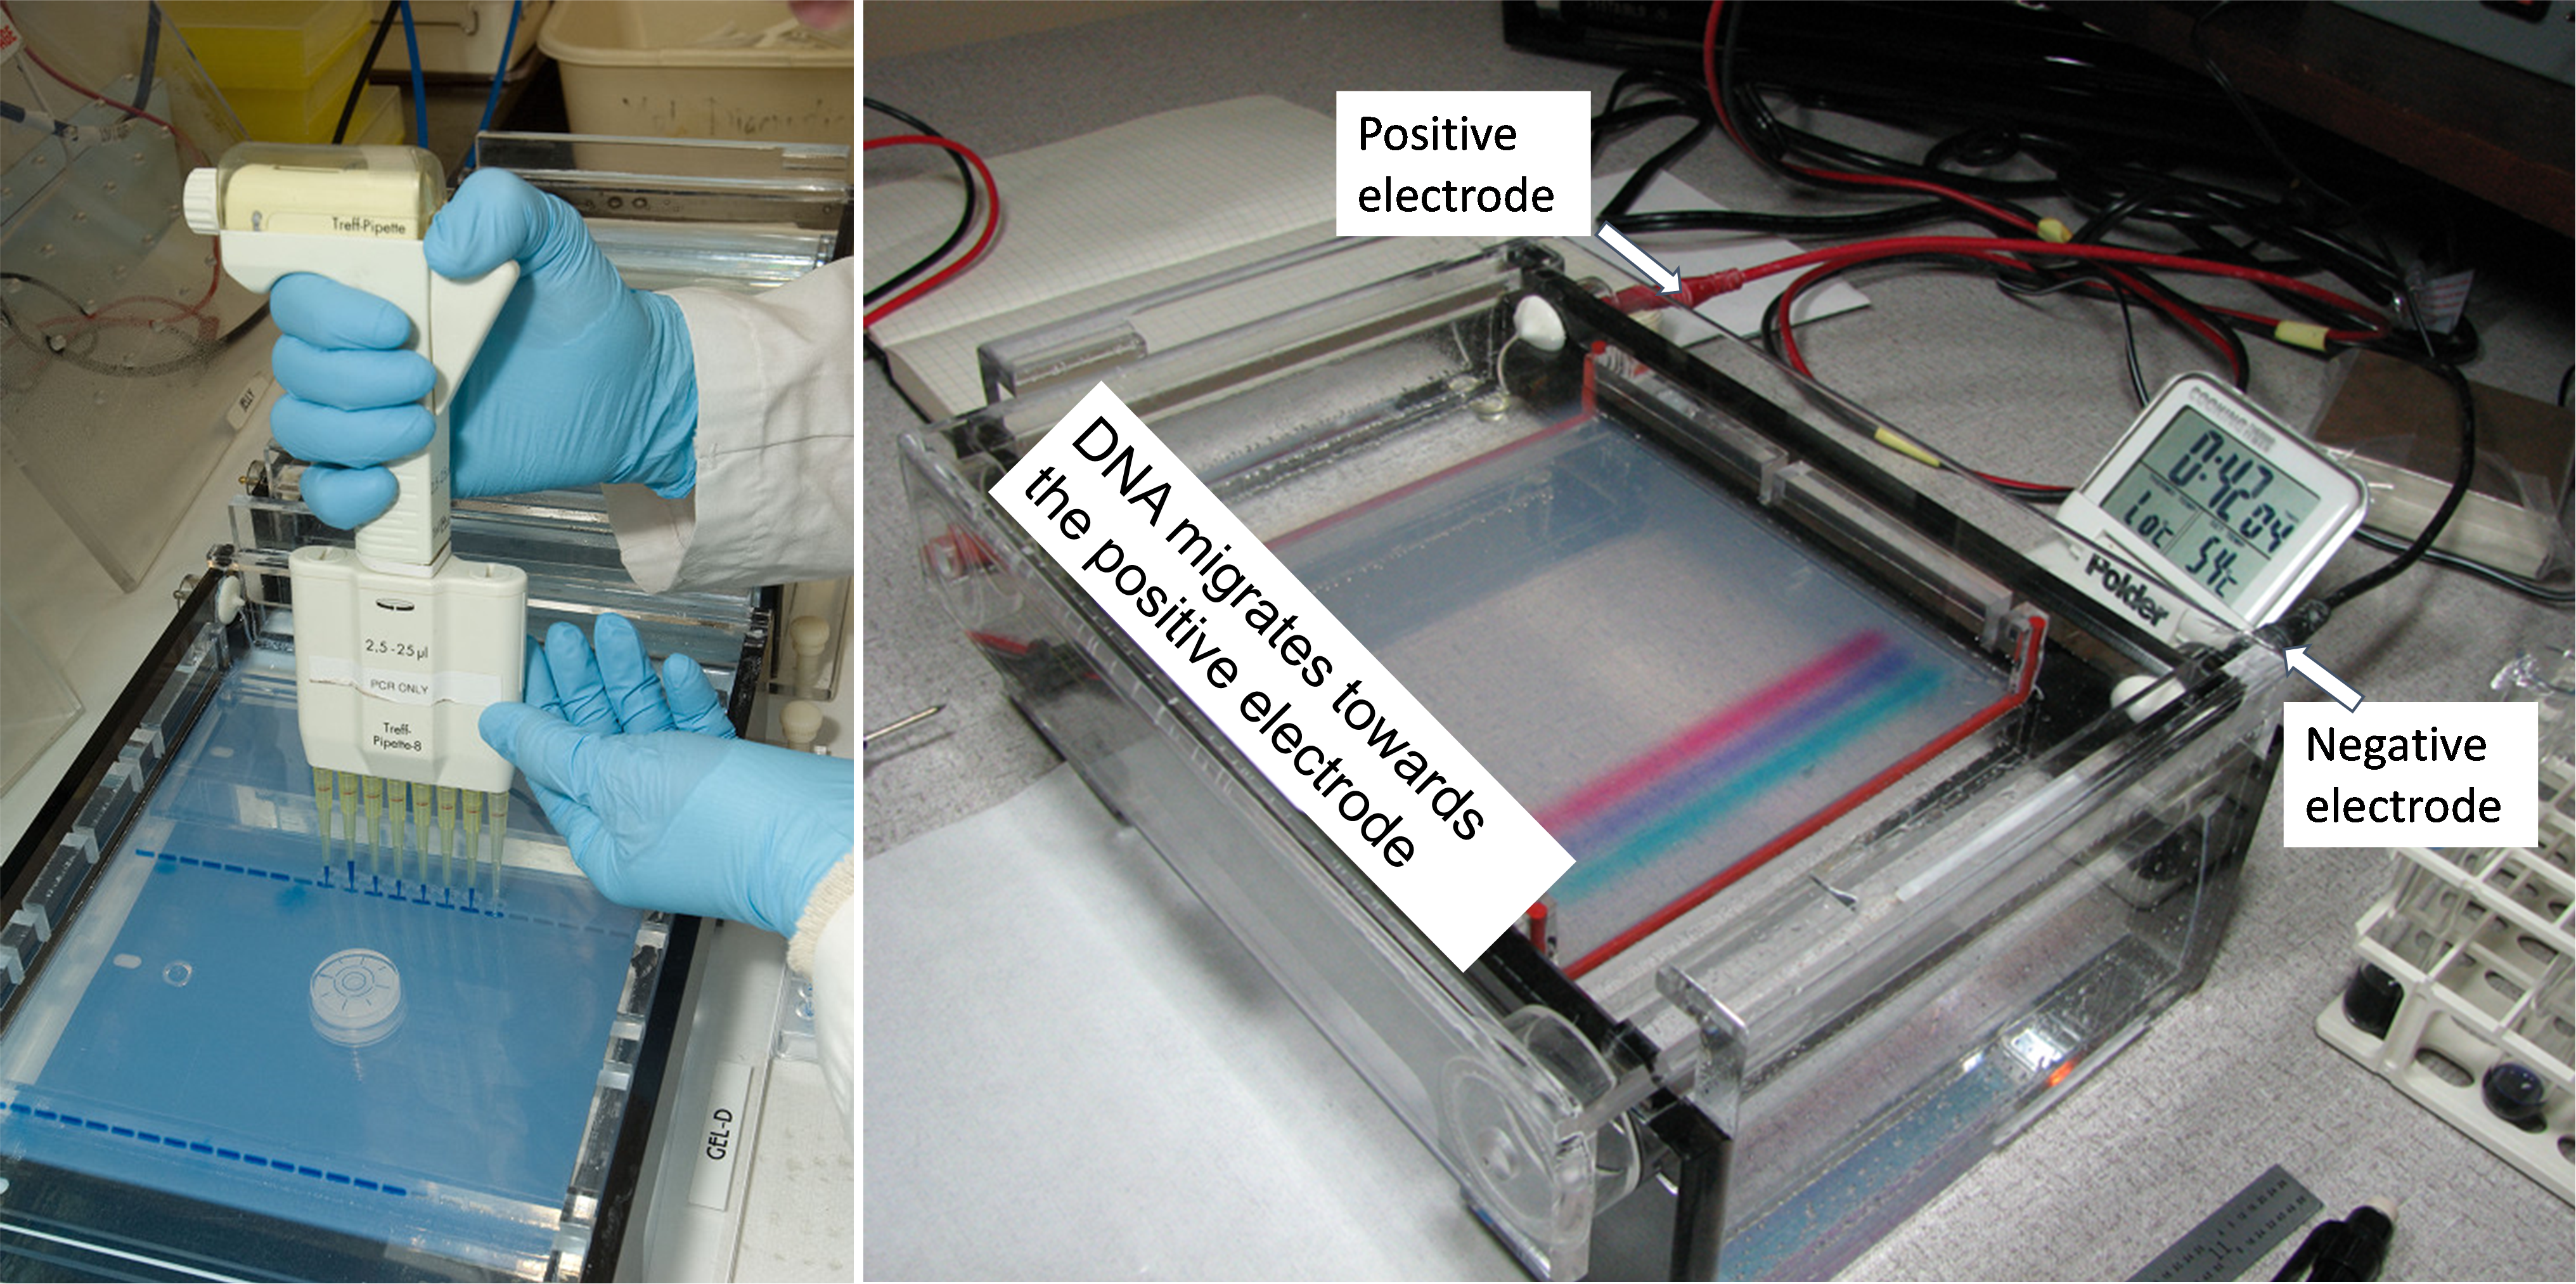 Two photos. In the first, a person wearing gloves and lab coat uses a pipette machine to drop samples into a blue gel. On the right, a machine processes the samples.